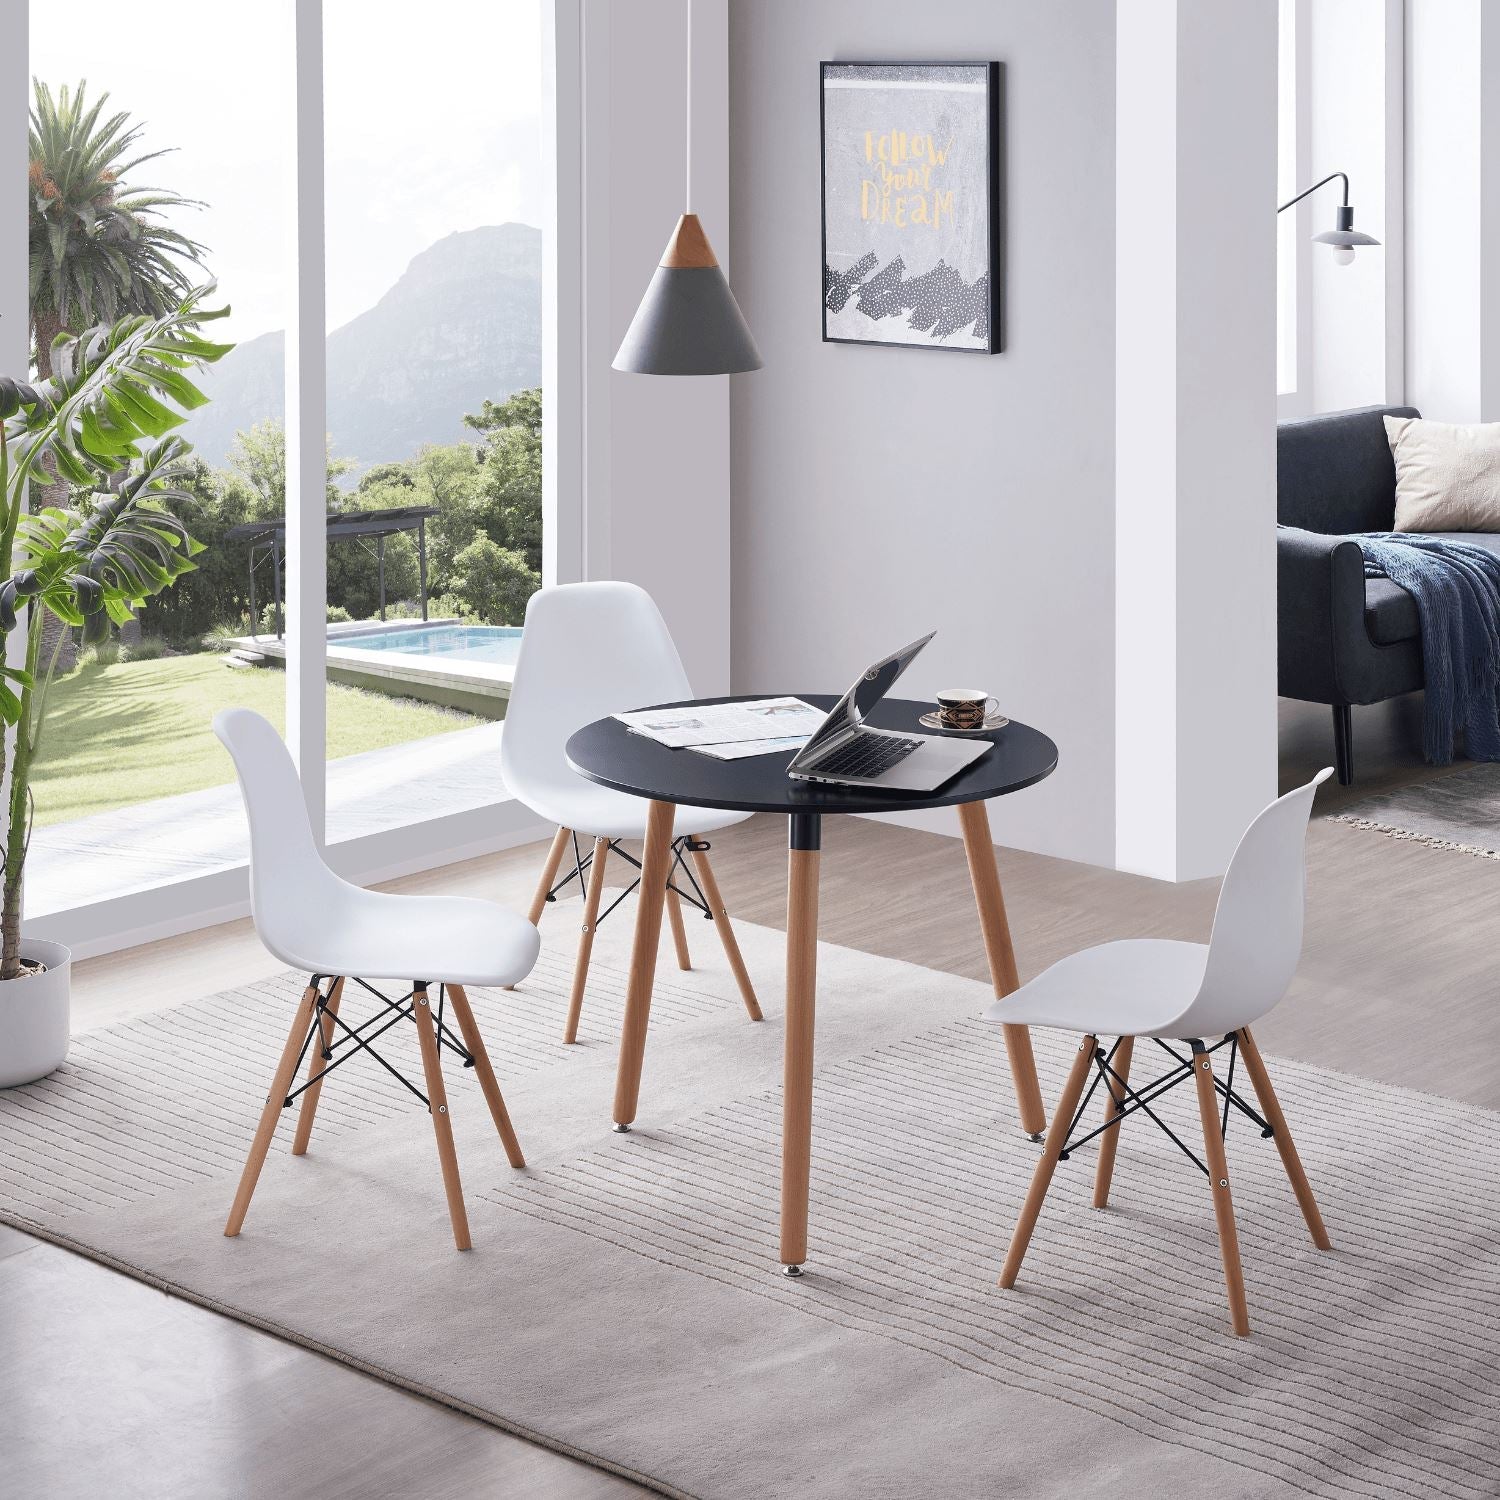 Valmes | Valyou Table Furniture